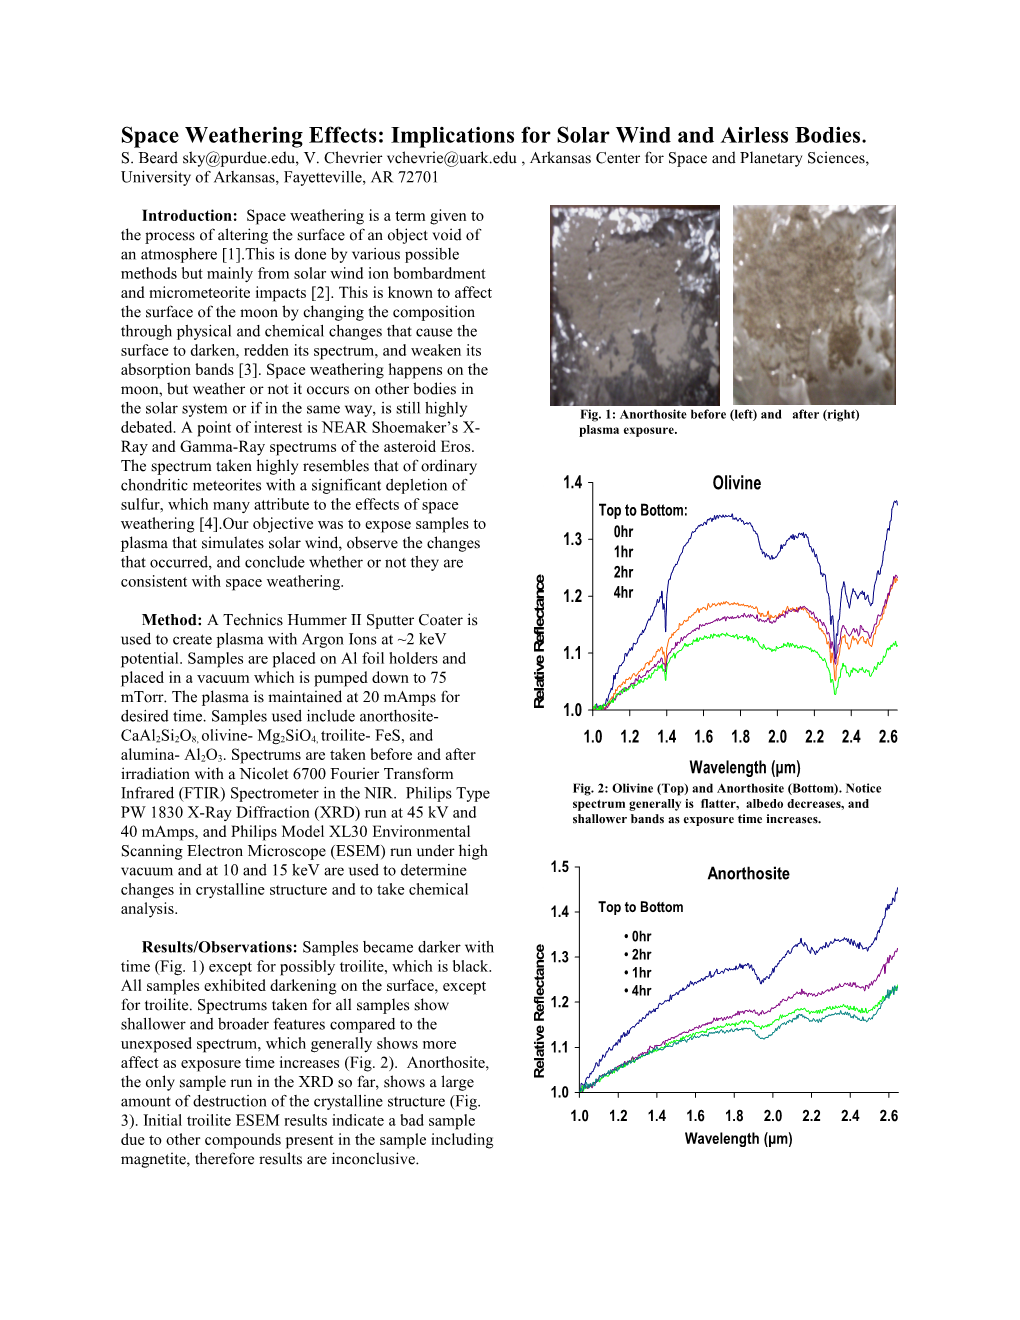 Space Weathering Effects: Application to Asteroids and Other Airless Bodies